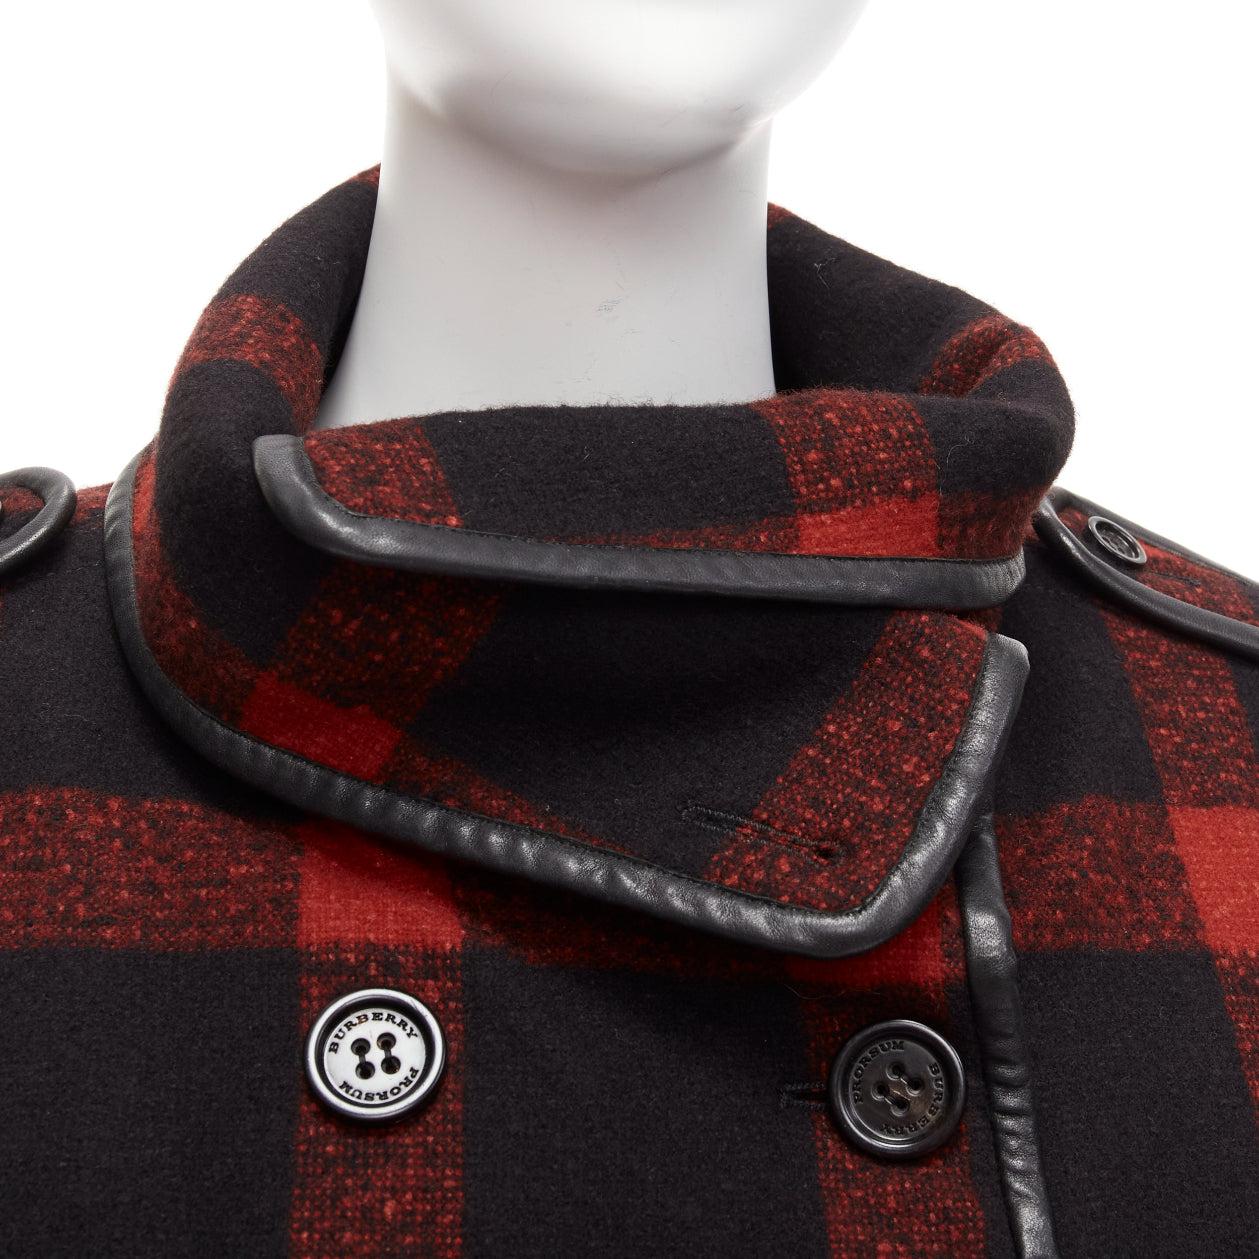 BURBERRY Runway red black wool plaid check leather trim cropped trench IT36 XXS
Reference: TGAS/D01125
Brand: Burberry
Designer: Christopher Bailey
Model: Cara Delevingne
Material: Virgin Wool, Blend
Color: Red, Black
Pattern: Plaid
Closure: